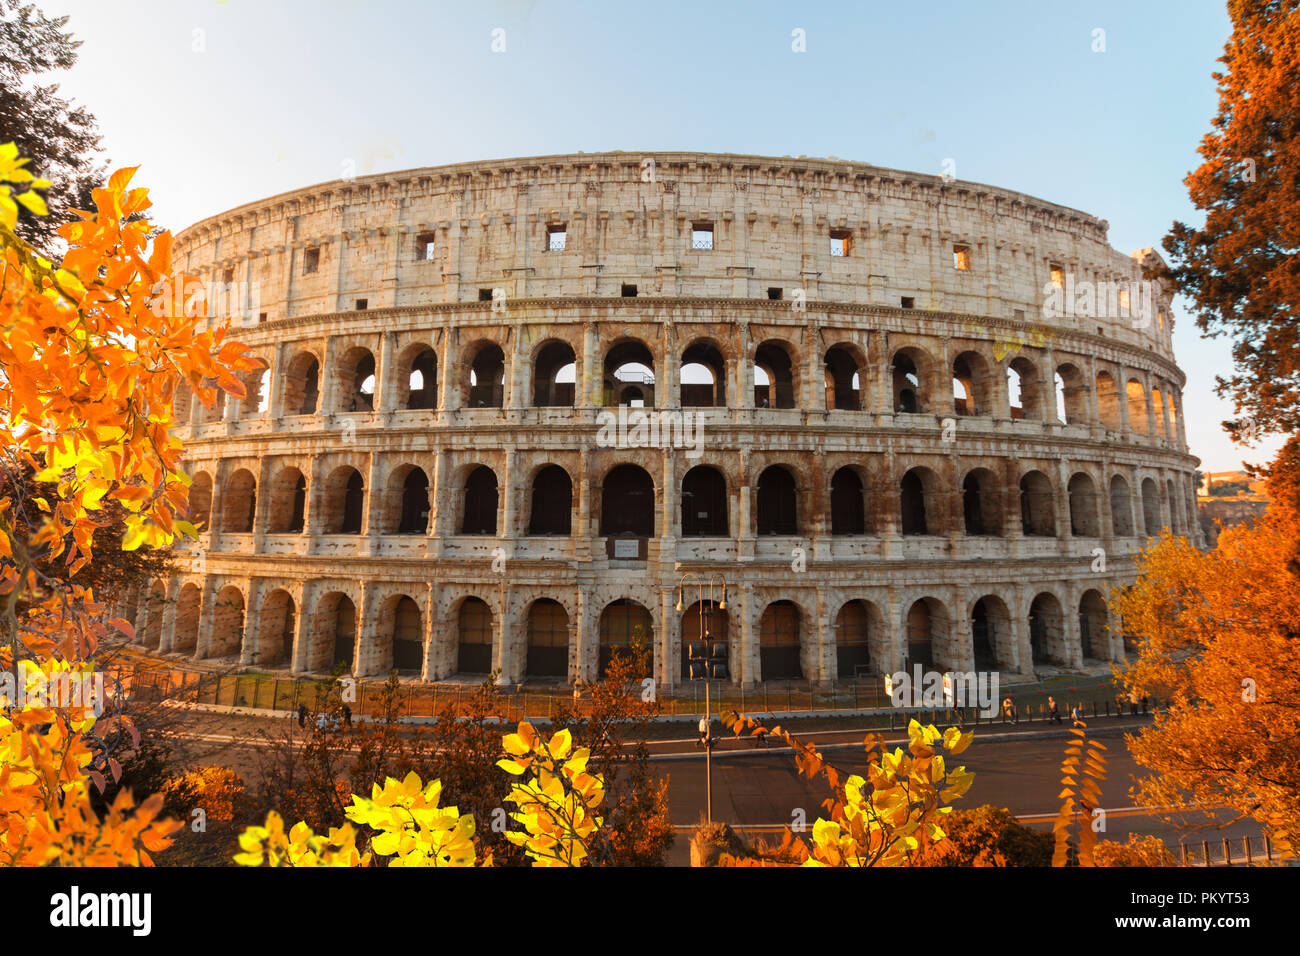 Colosseum at sunset in Rome, Italy Stock Photo